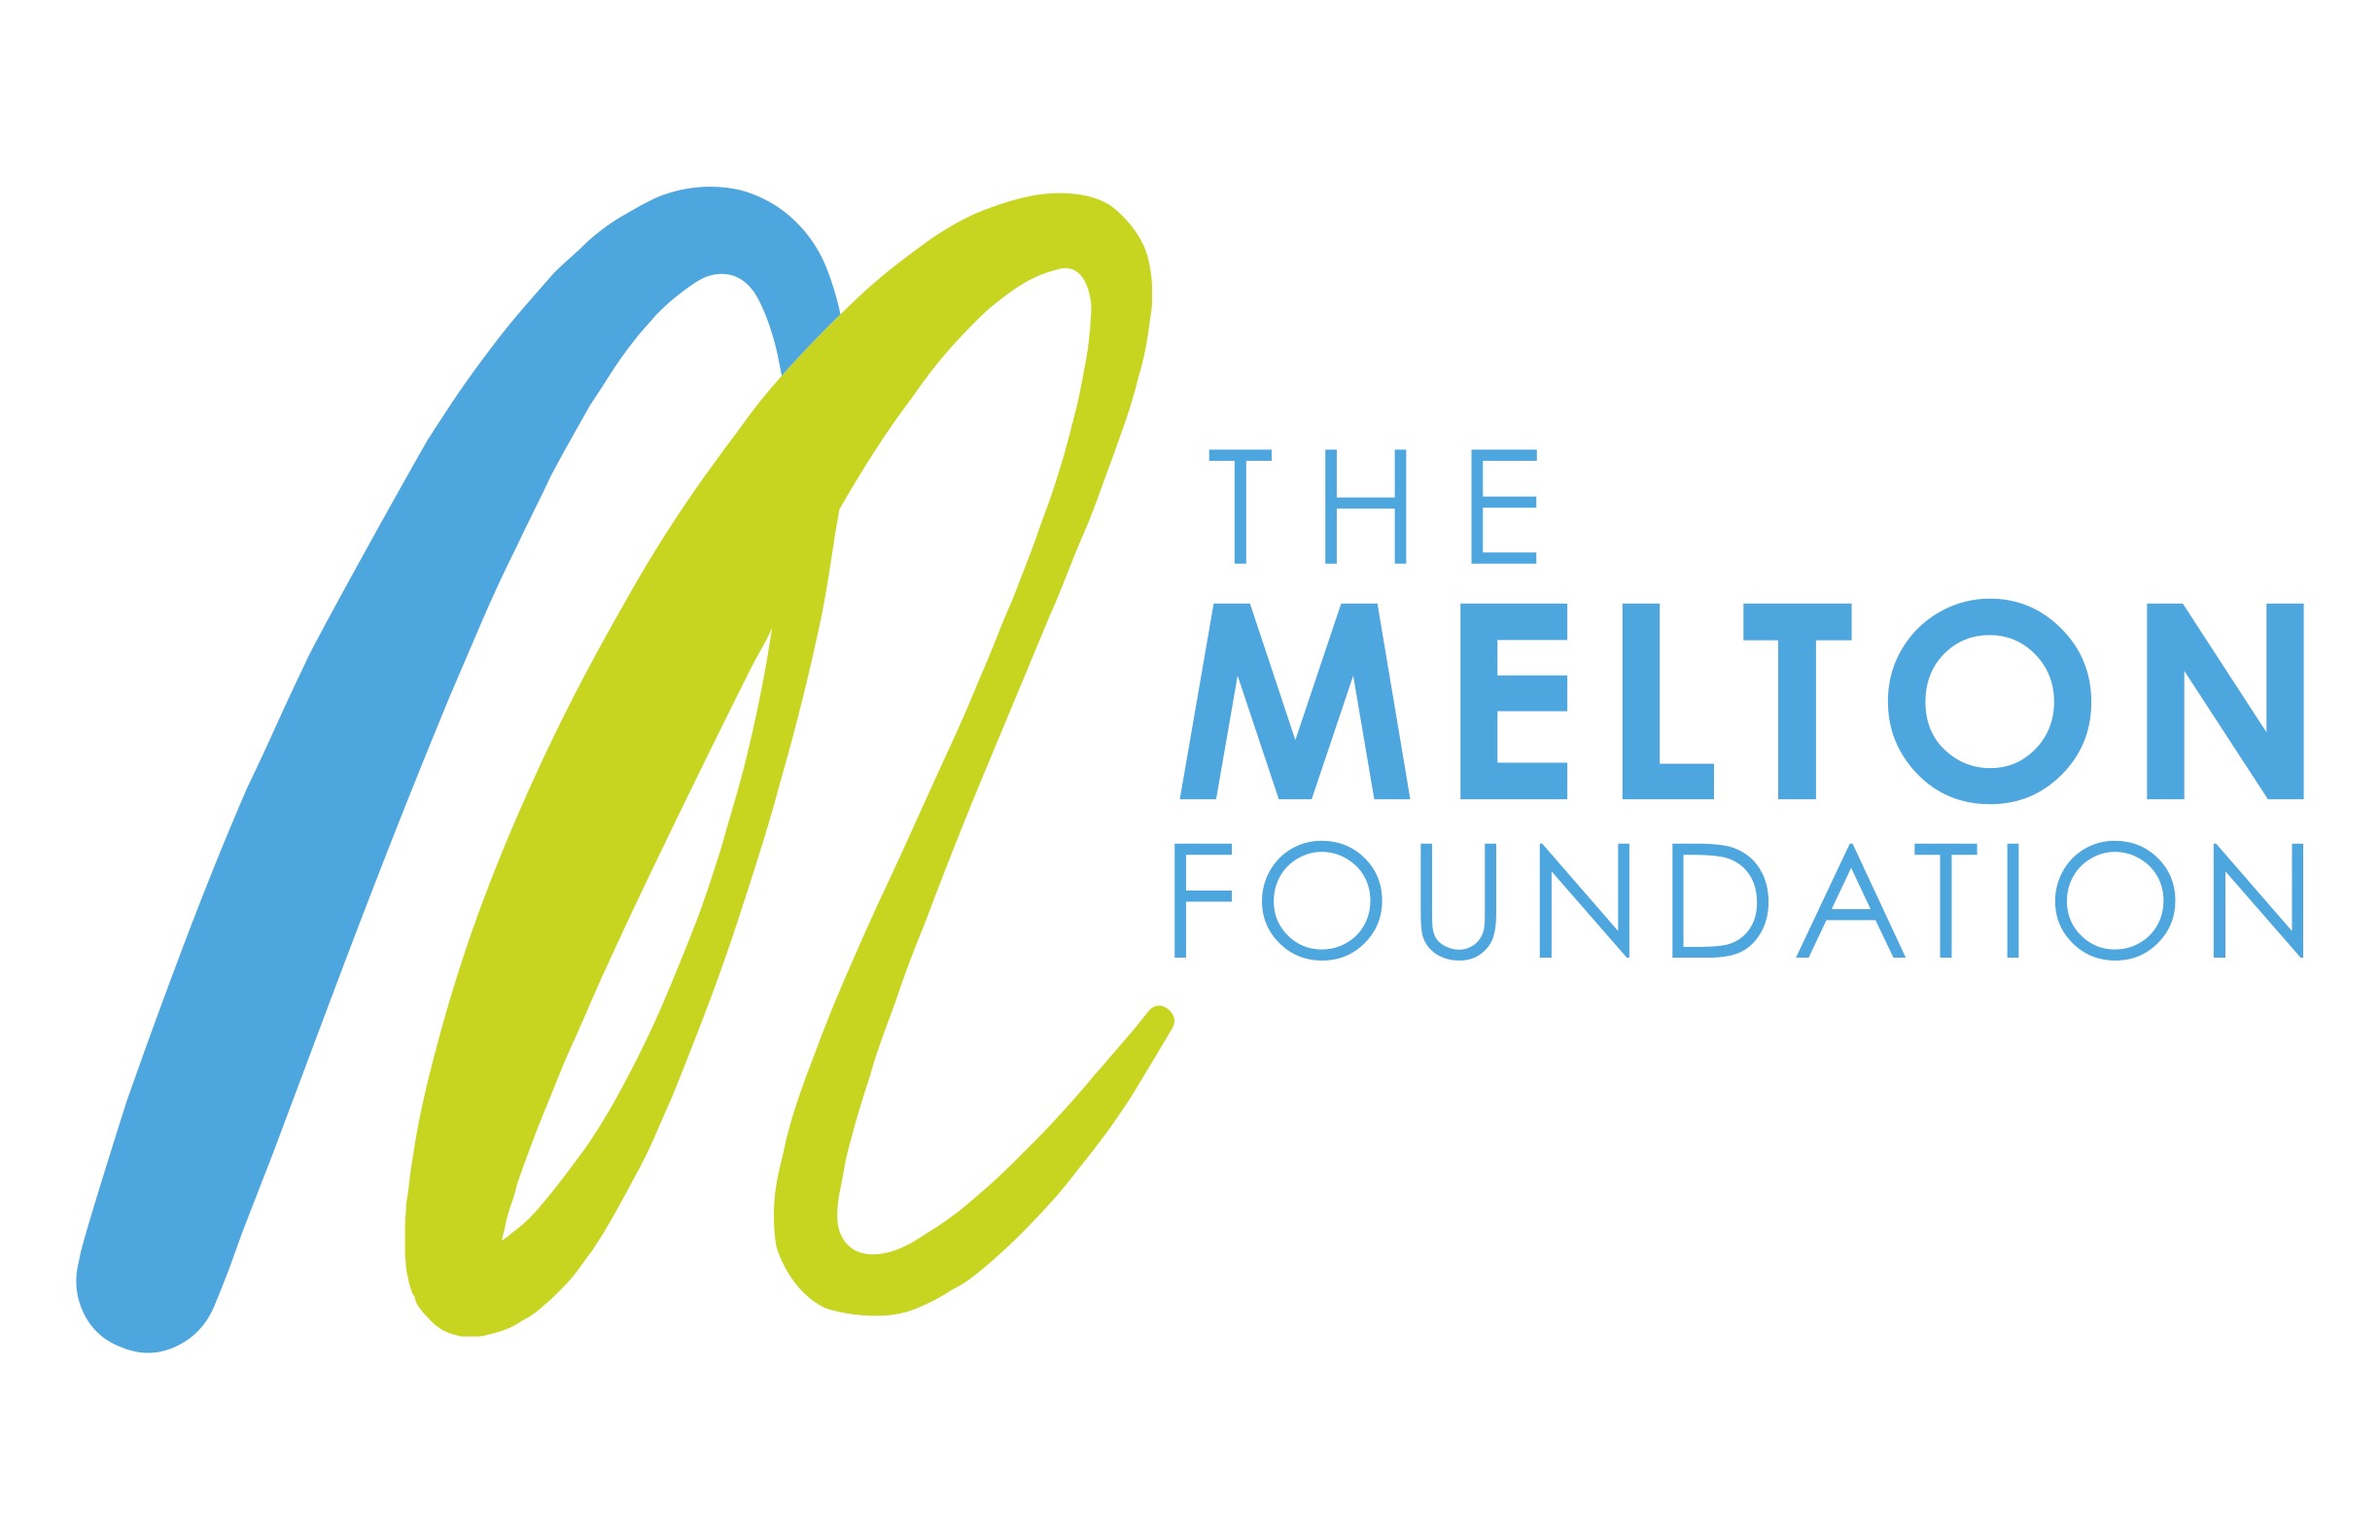 The Melton Foundation Full logo with text. Melton blue and green branding.